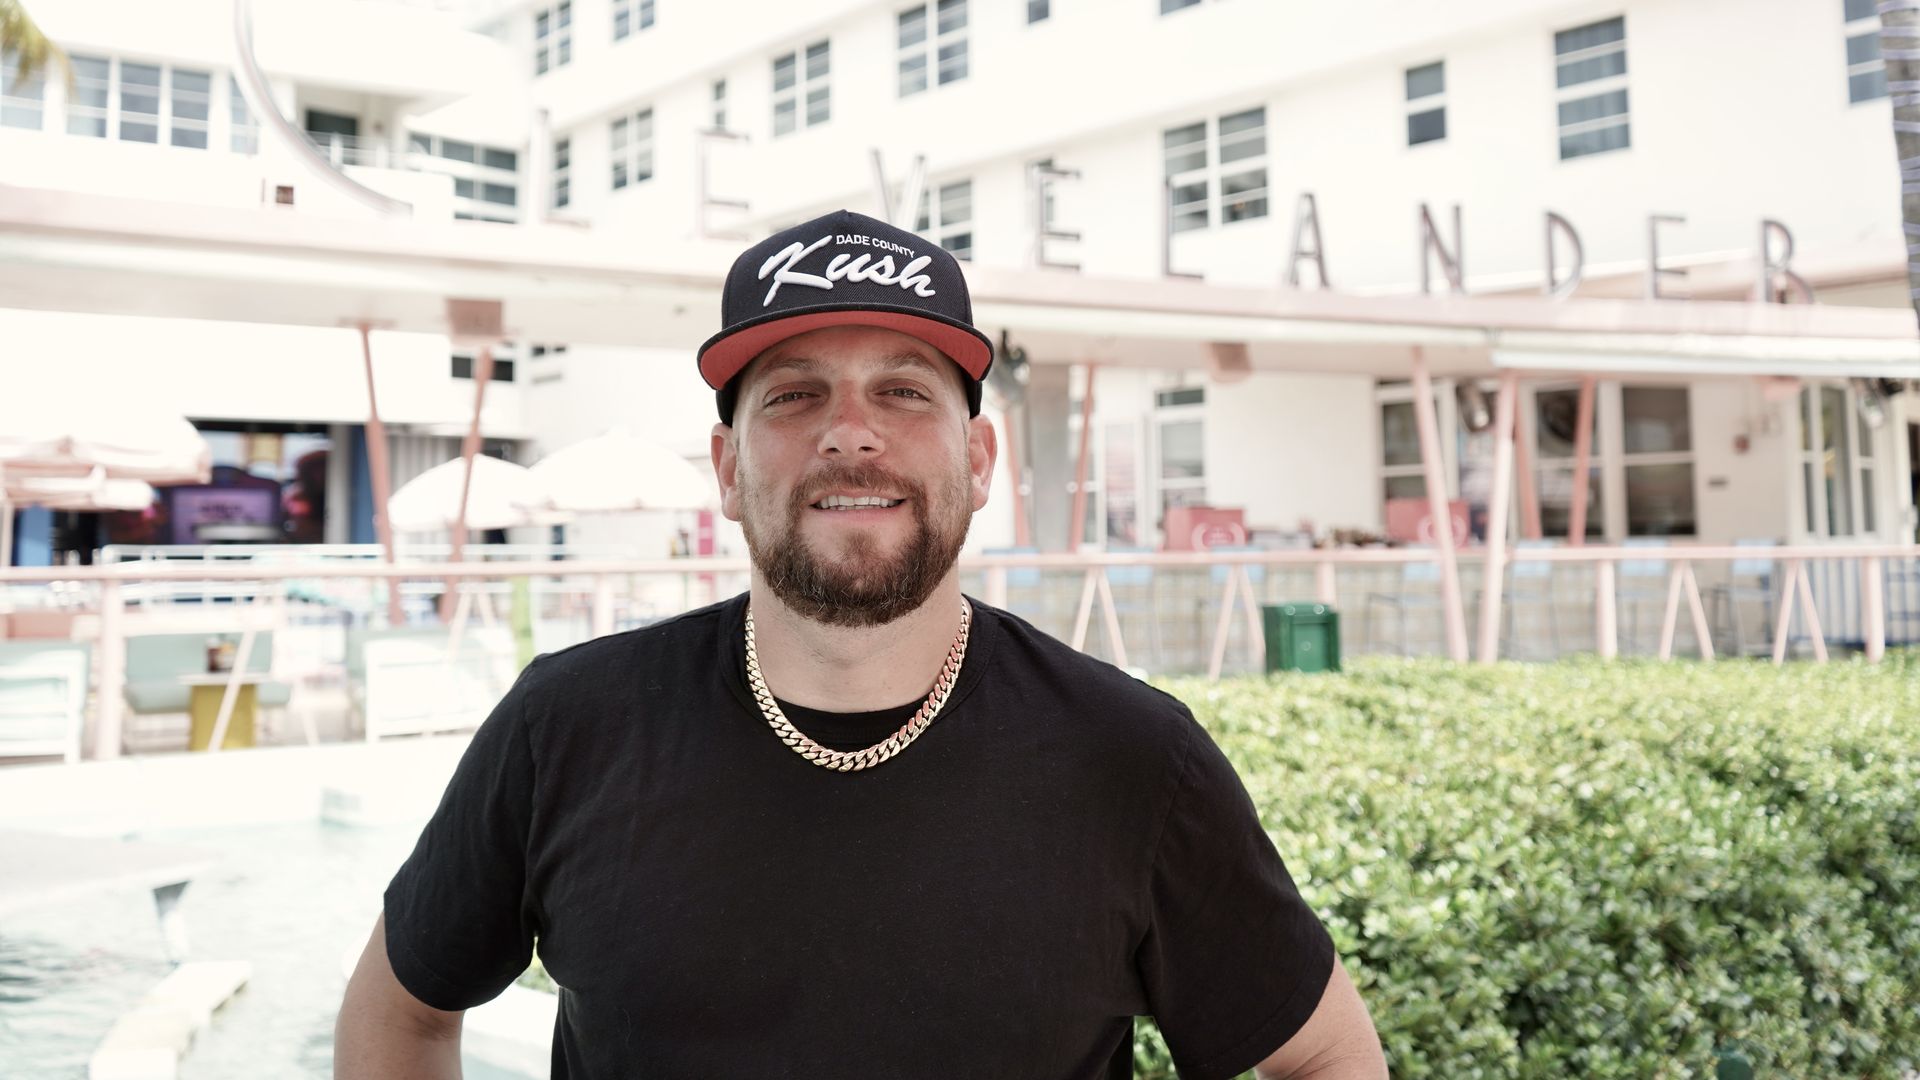 Matt "Kush" Kuscher stands in front of the Clevelander Hotel on a sunny day wearing a baseball cap that says "Miami." 